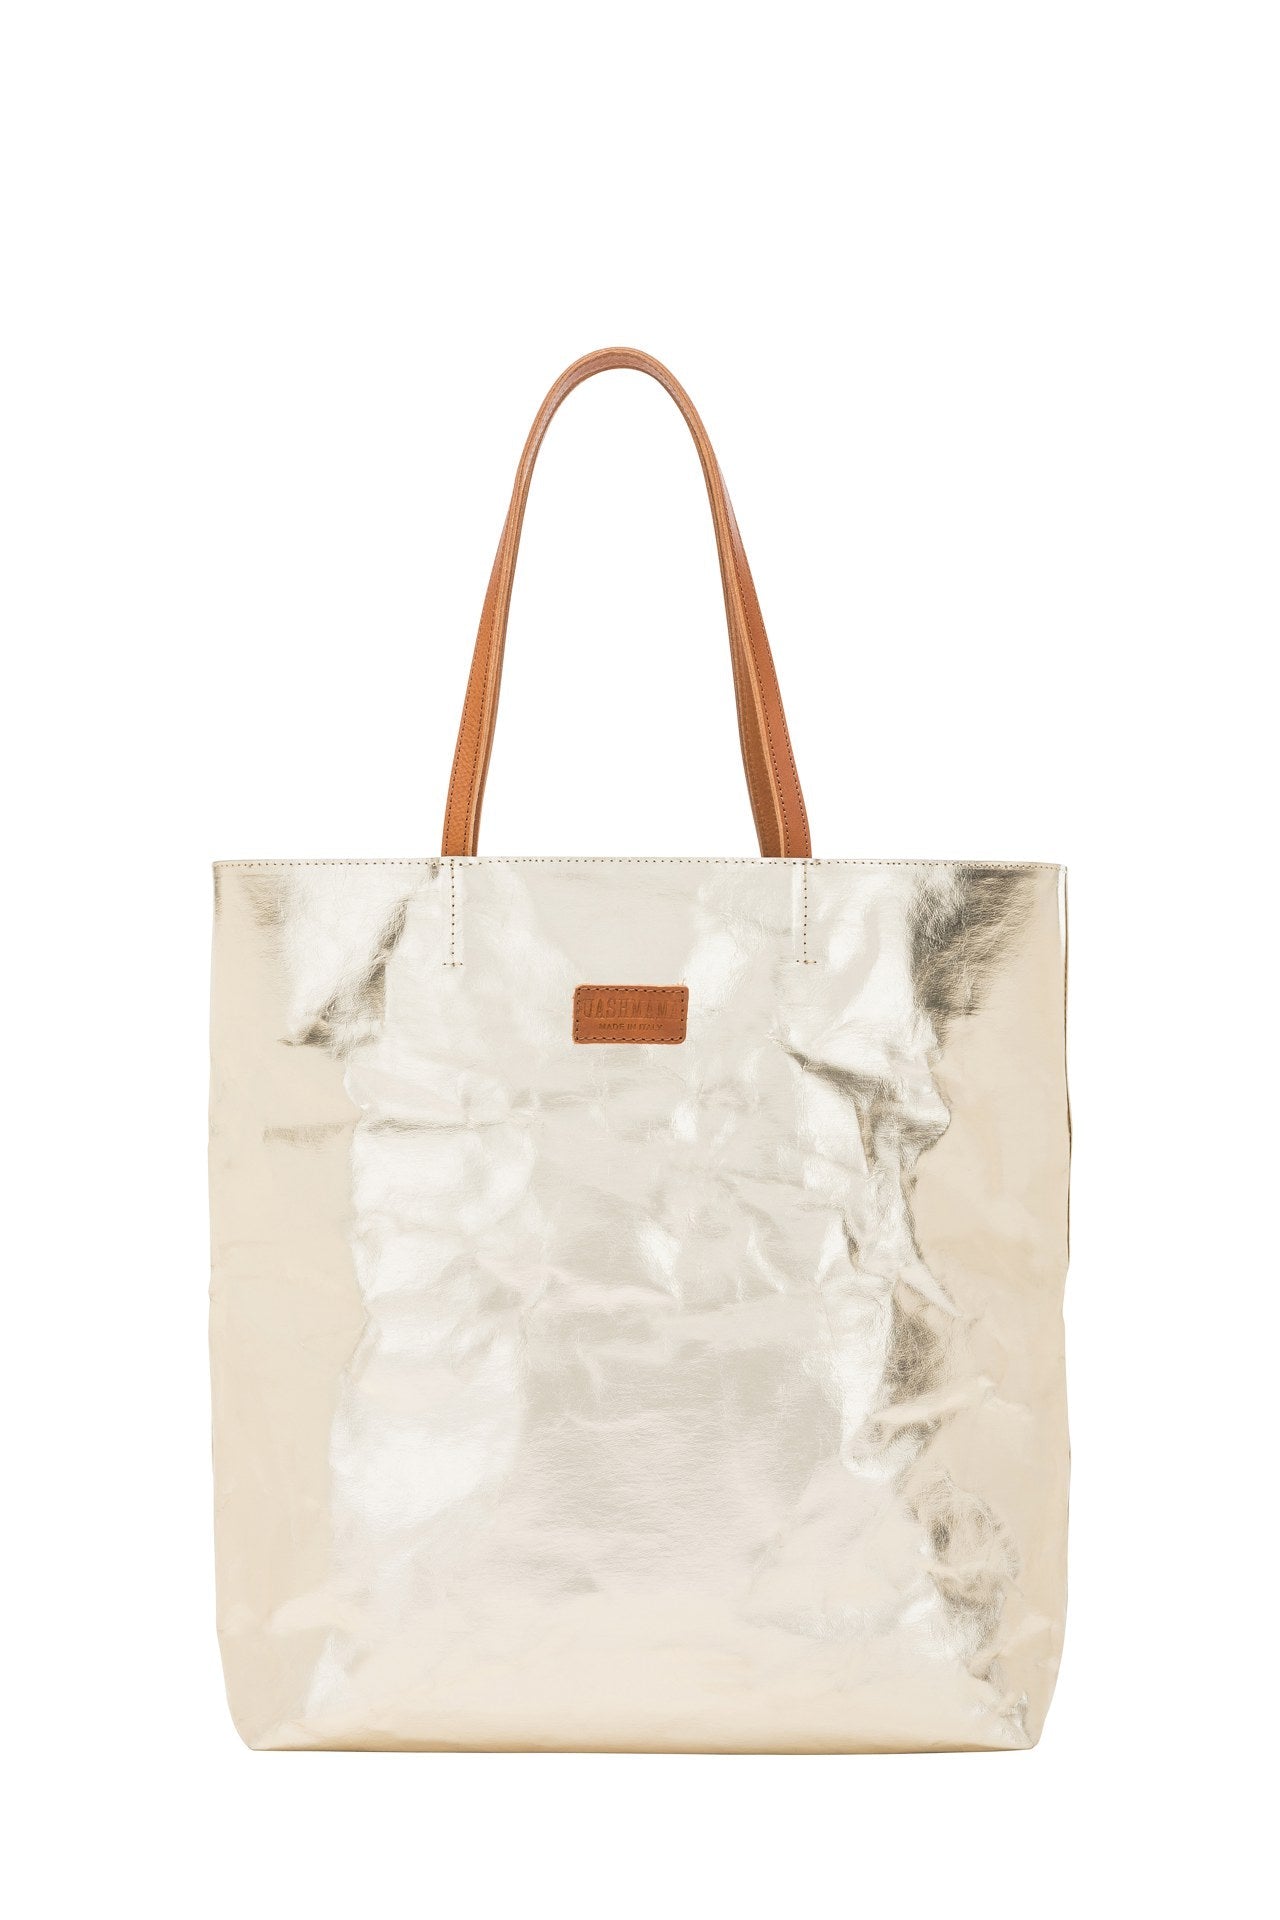 A washable paper tote back is shown. It has two long leather handles and small leather UASHMAMA label on the front. It is shown in a metallic platinum colour with tan handles and label.